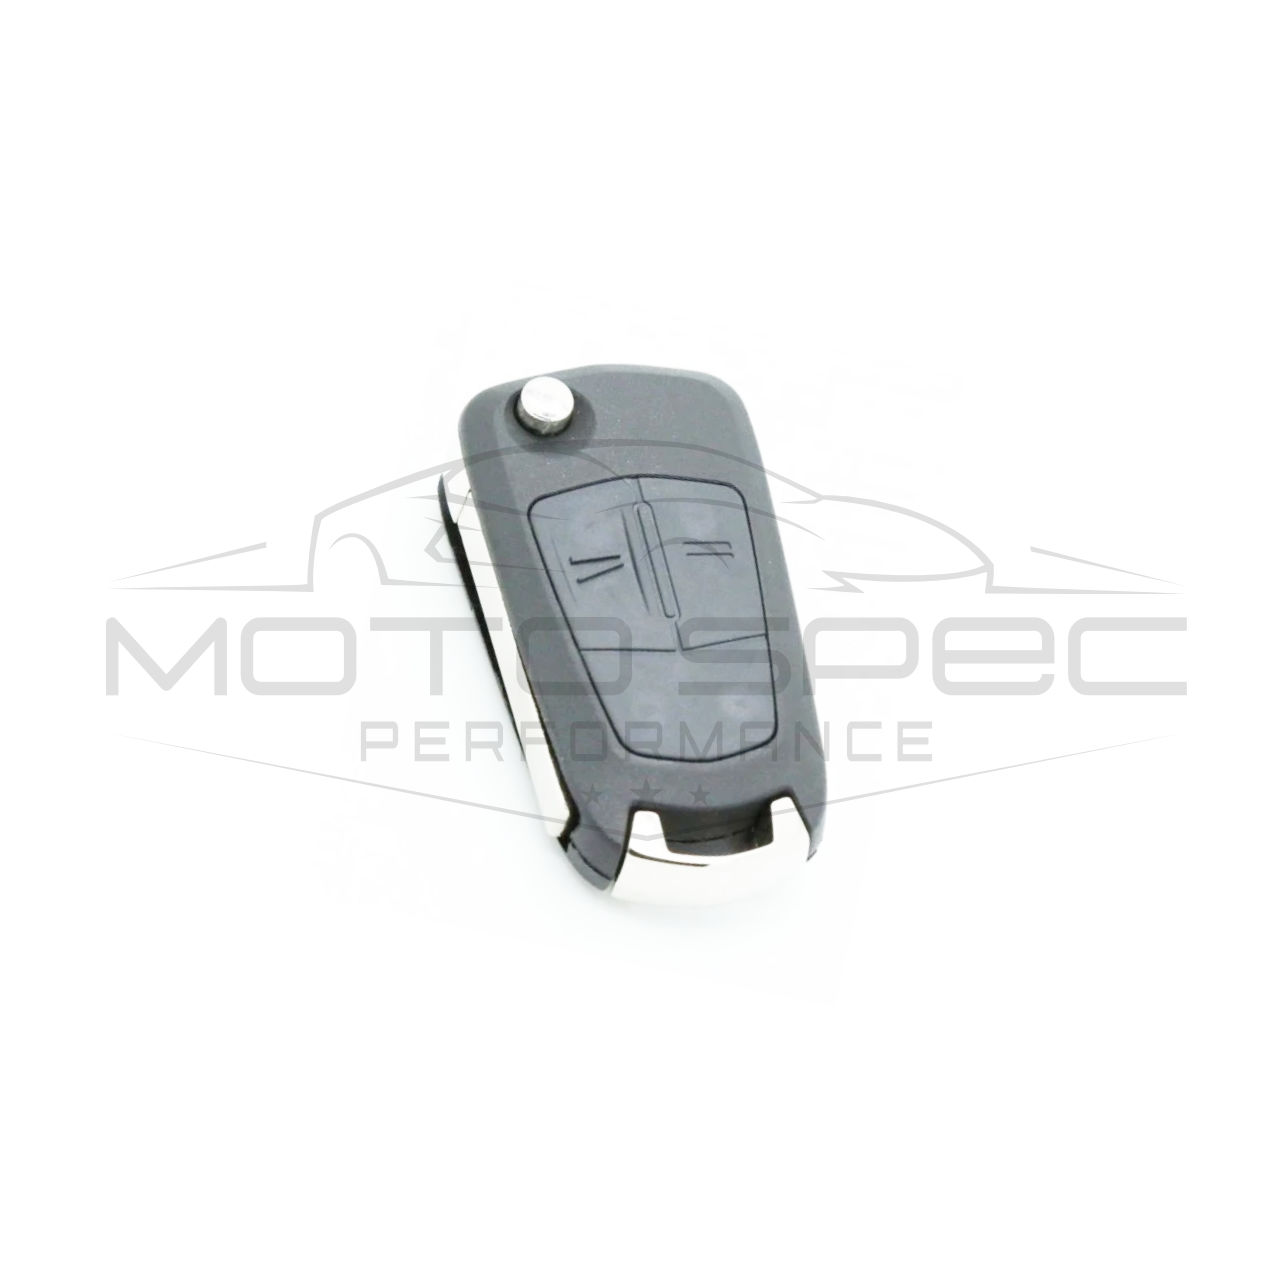 Remote Key For Vauxhall Opel Astra H Zafira B 2 Buttons Valeo System 433 MHZ